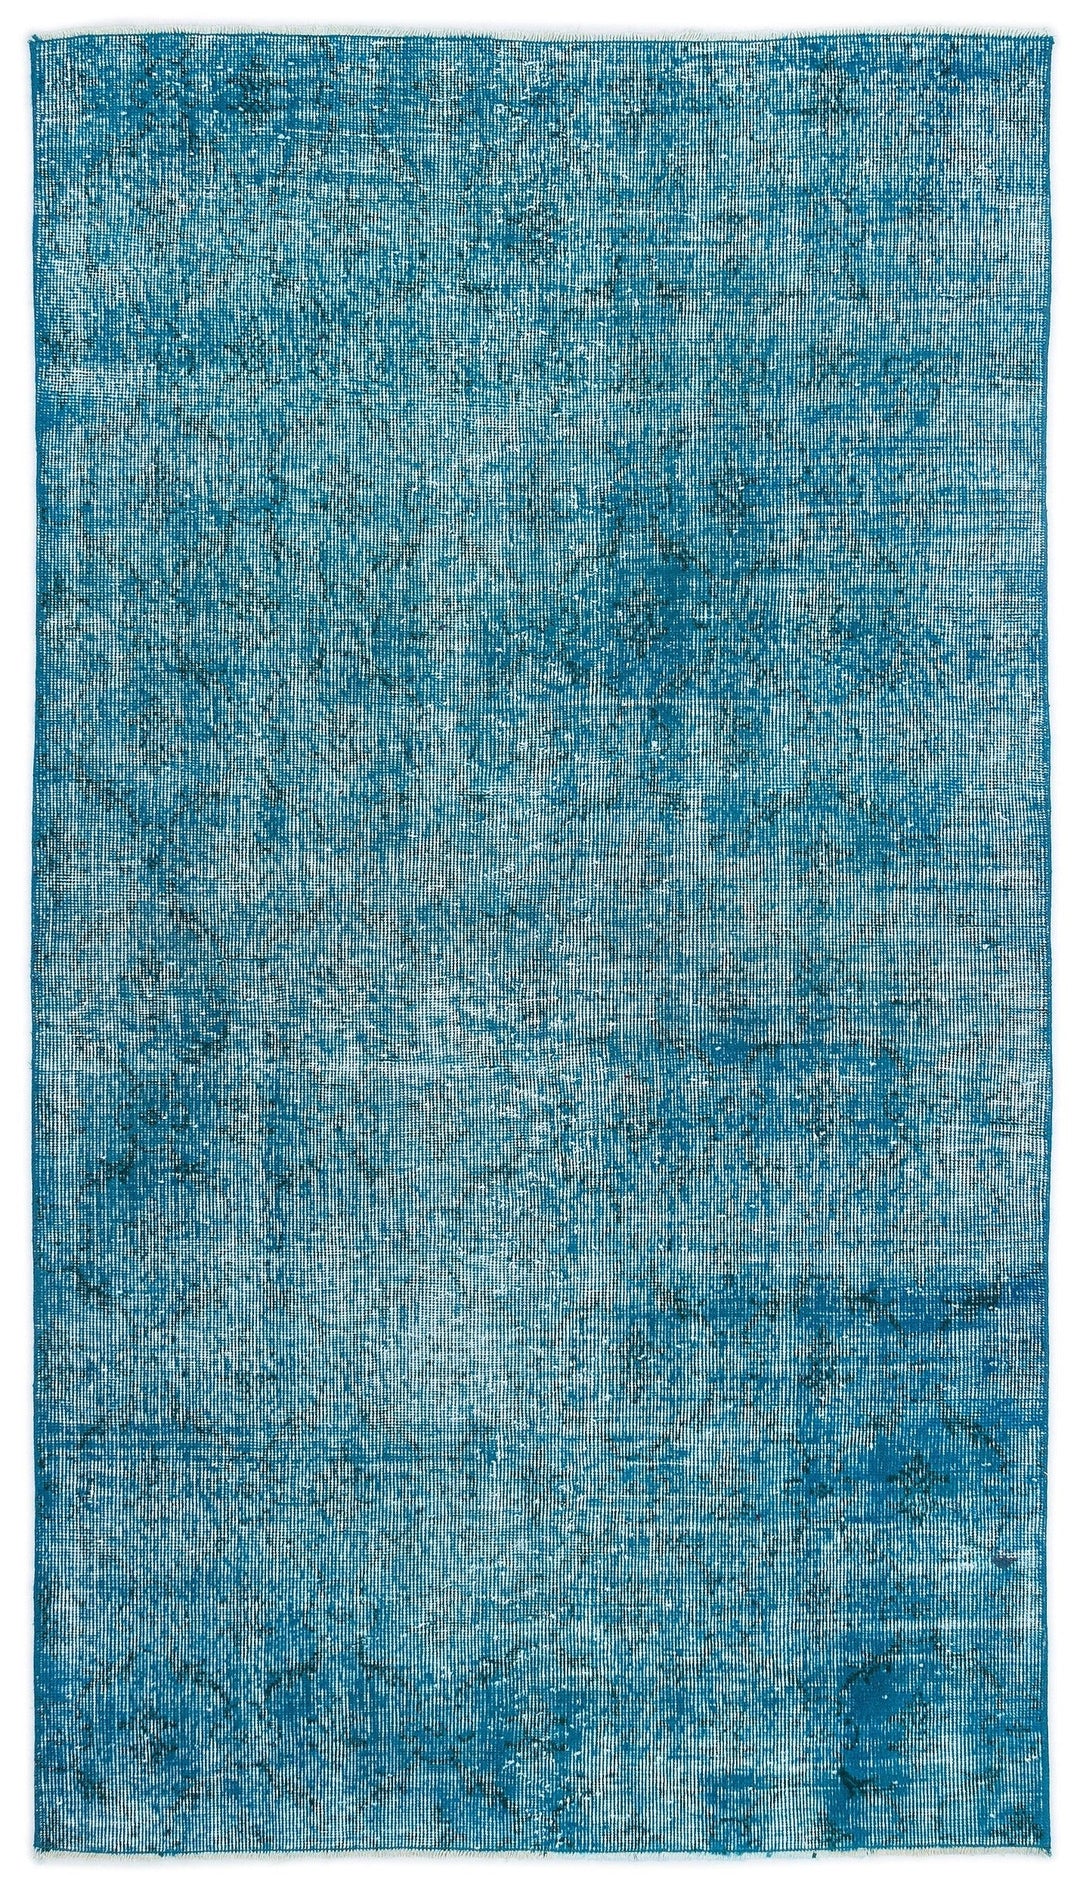 Athens Turquoise Tumbled Wool Hand Woven Carpet 119 x 210